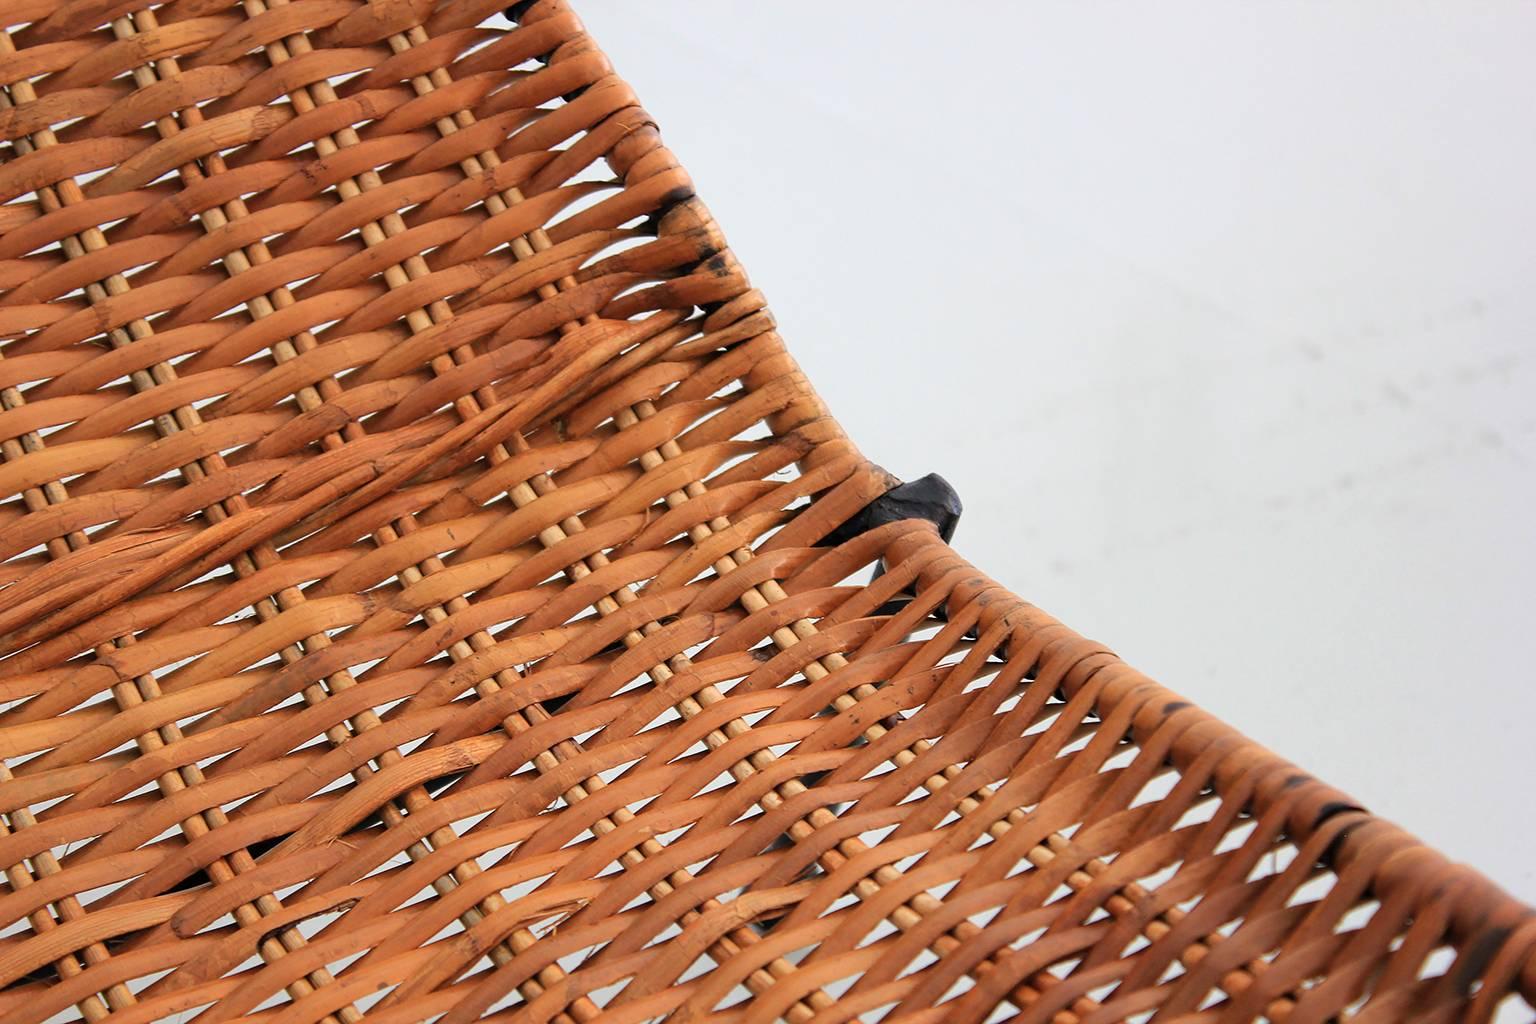 Woven Wicker Pool Chairs  2